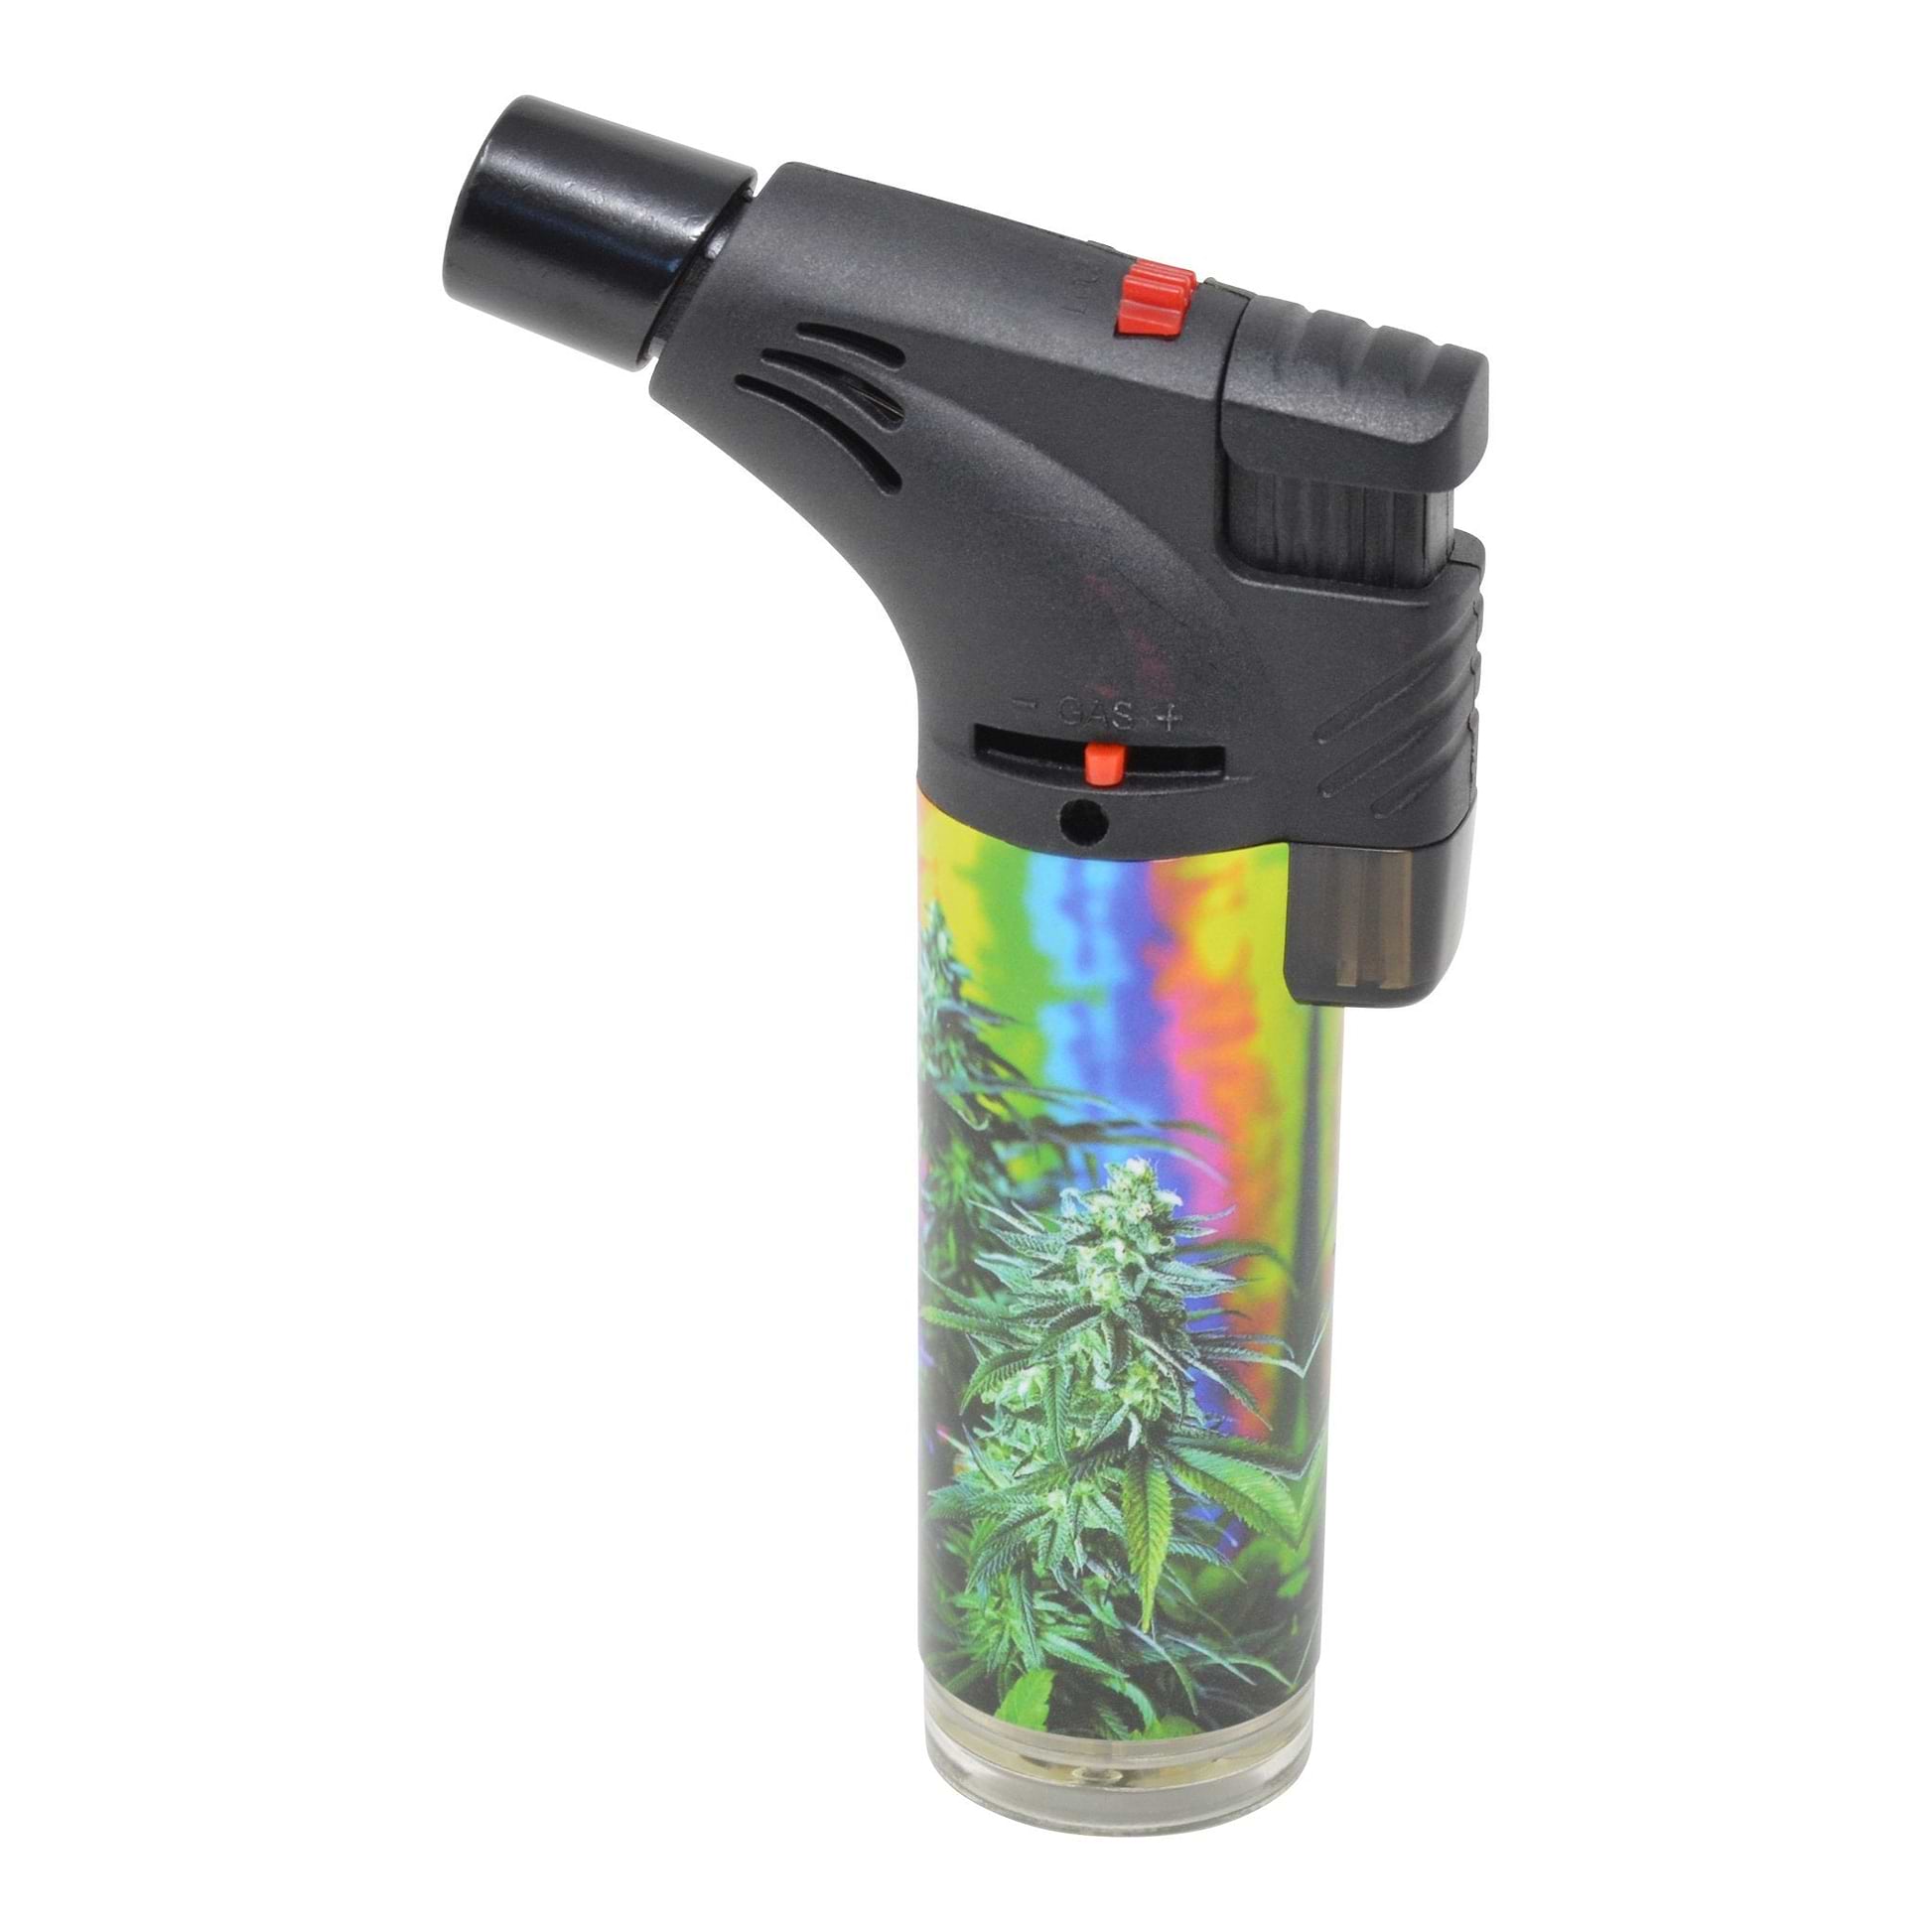 High angle shot of single flame torch black nozzle facing left with prismatic multicolored weed leaves design